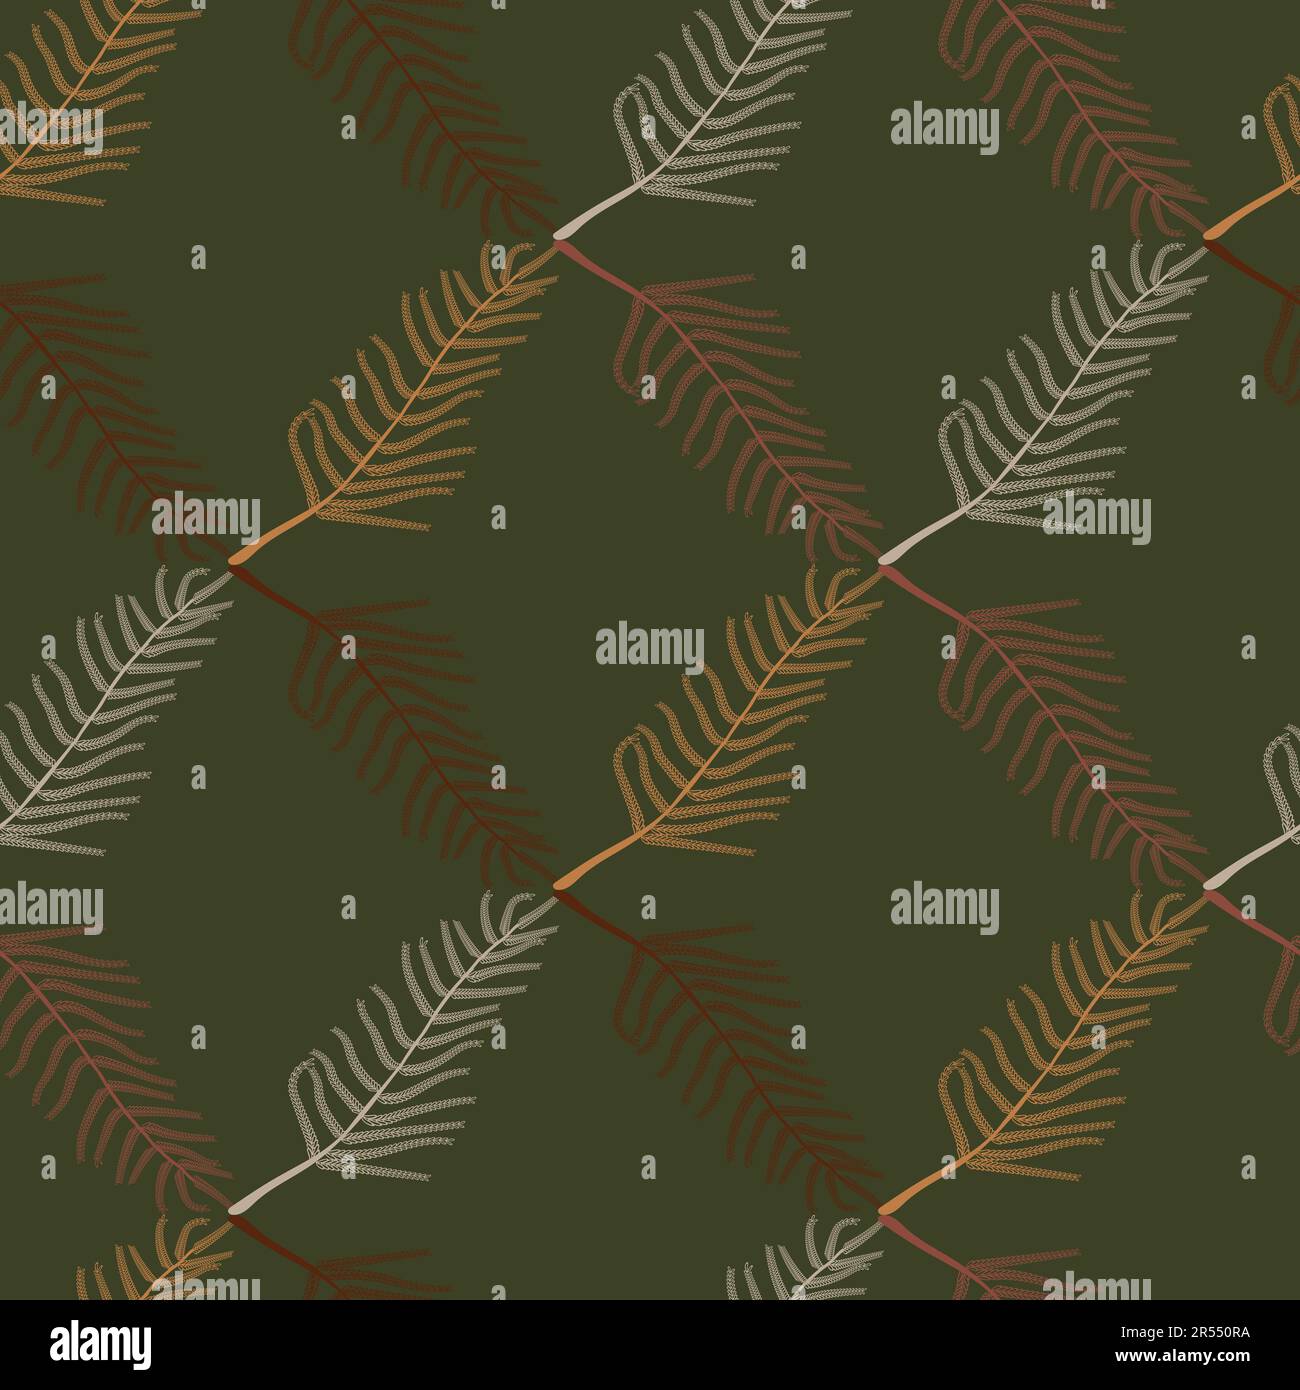 Acacia dealbata leaves seamless pattern. Cosmetic, perfumery and medical plant. Neutral decorative organic floral surface print design.  Stock Vector